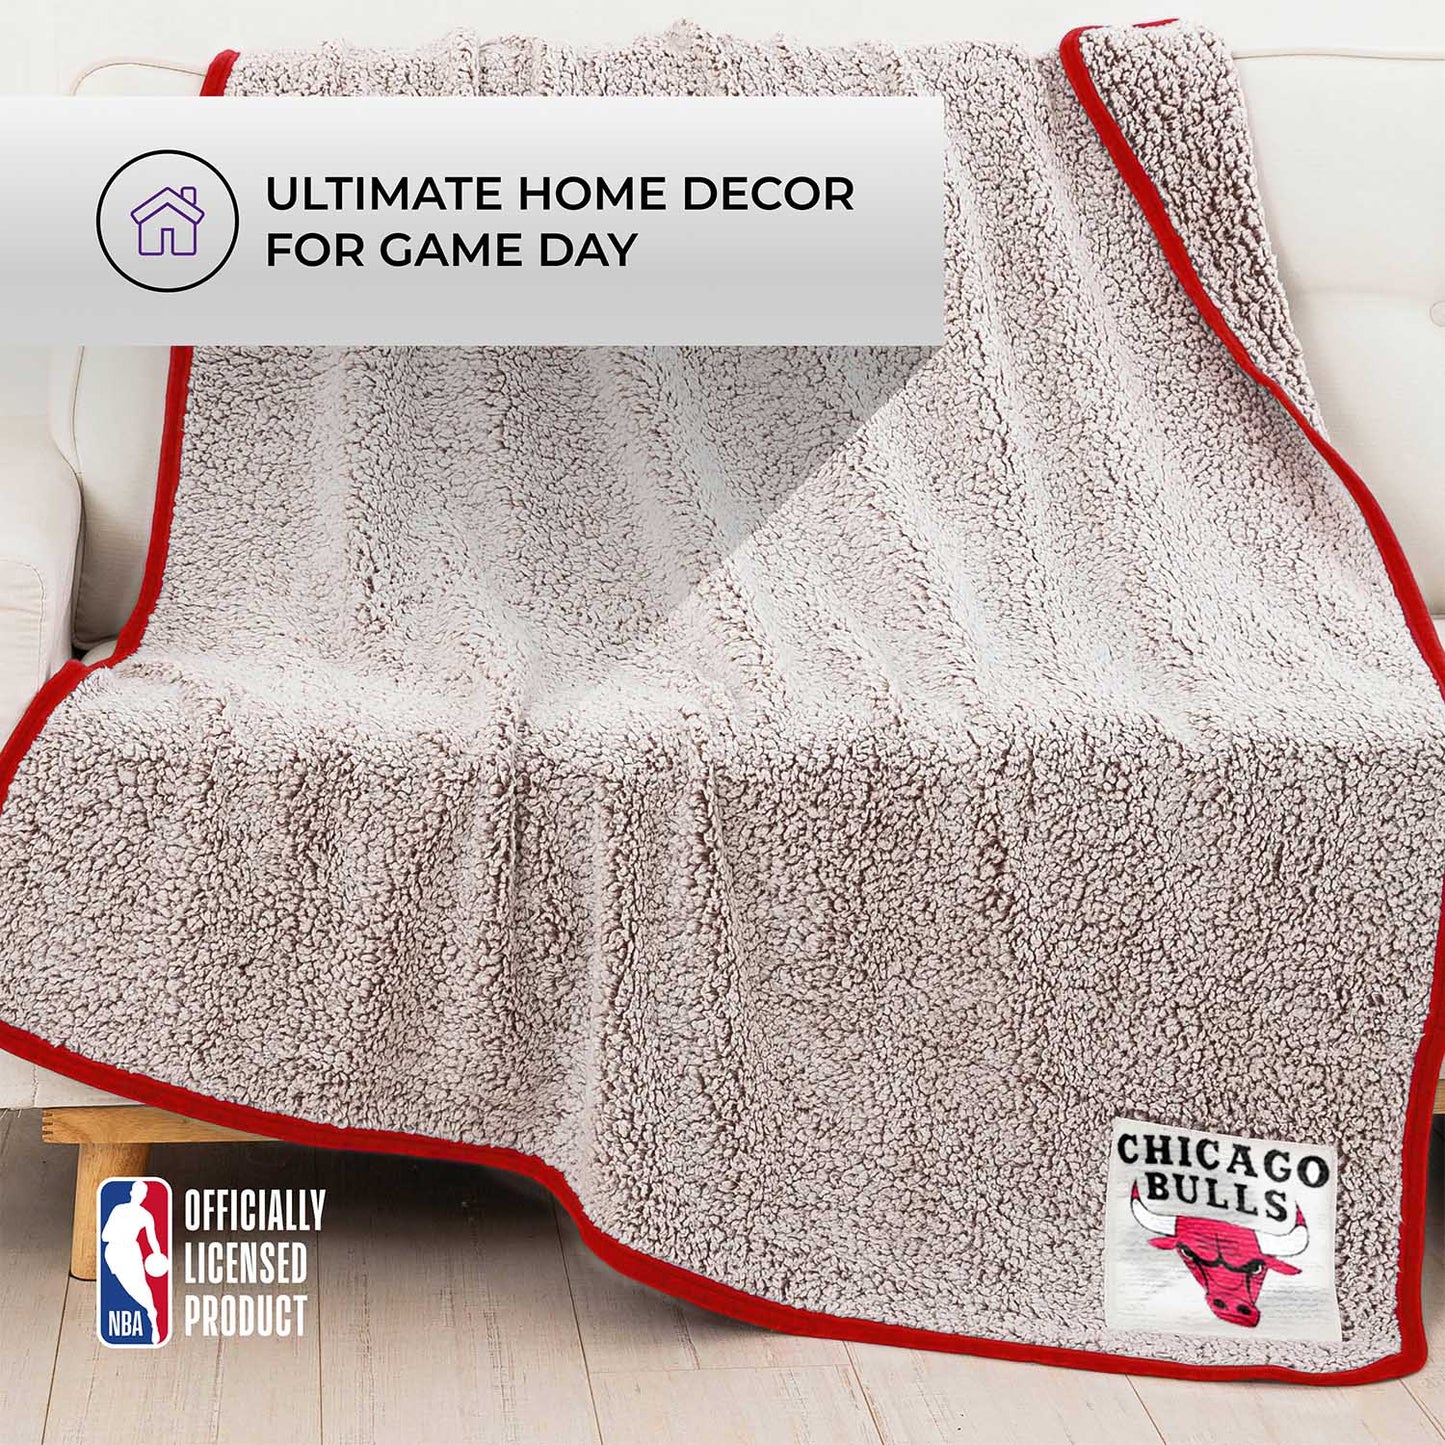 Chicago Bulls NBA Silk Touch Sherpa Throw Blanket - Red